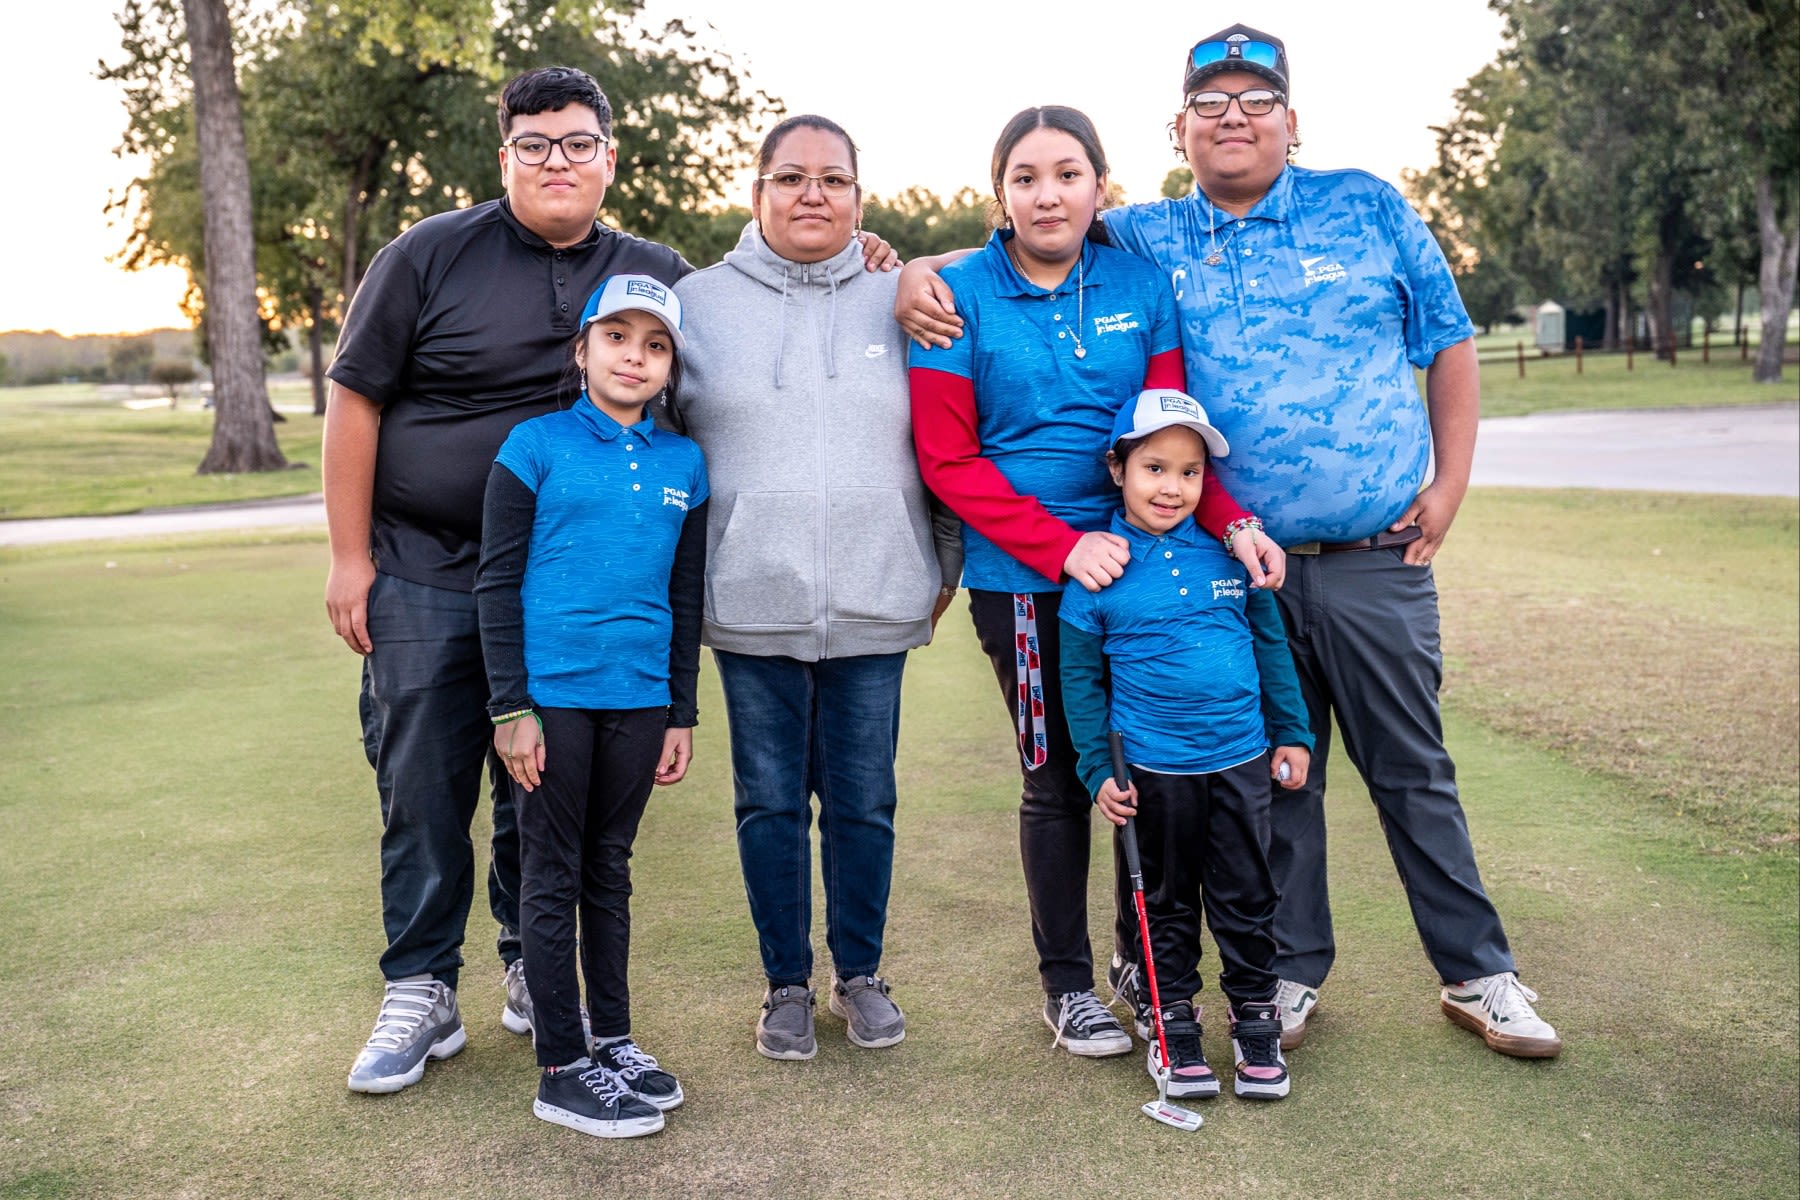 Eric (far left) and Jose (far right) Rodriguez, who now both work at Keeton Park, with their family. (Ryan Lochhead)